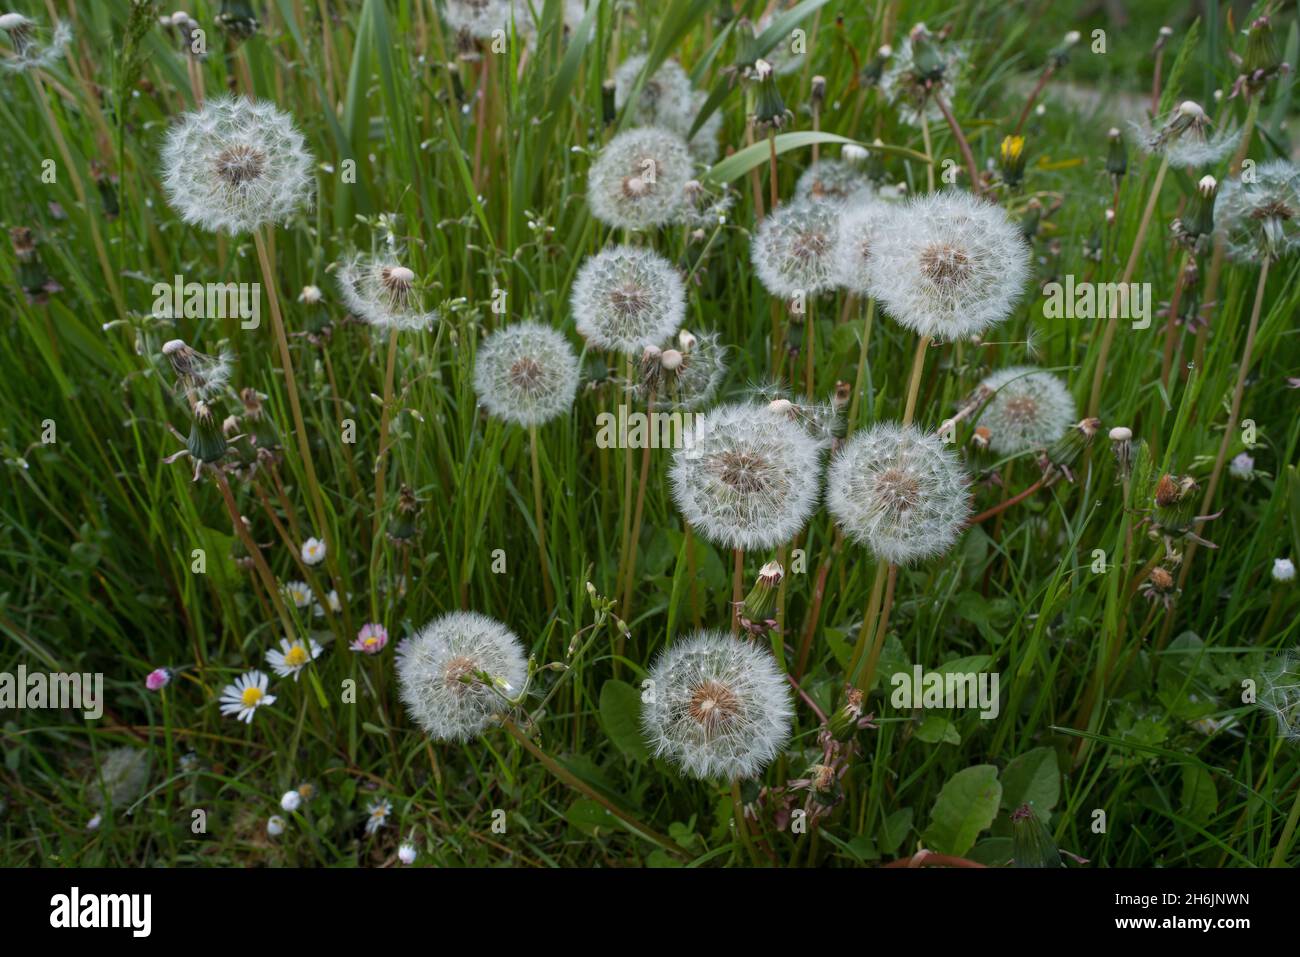 Common dandelion Taraxacum officinale seed heads are round balls of many silver-tufted fruits that disperse in the wind Stock Photo